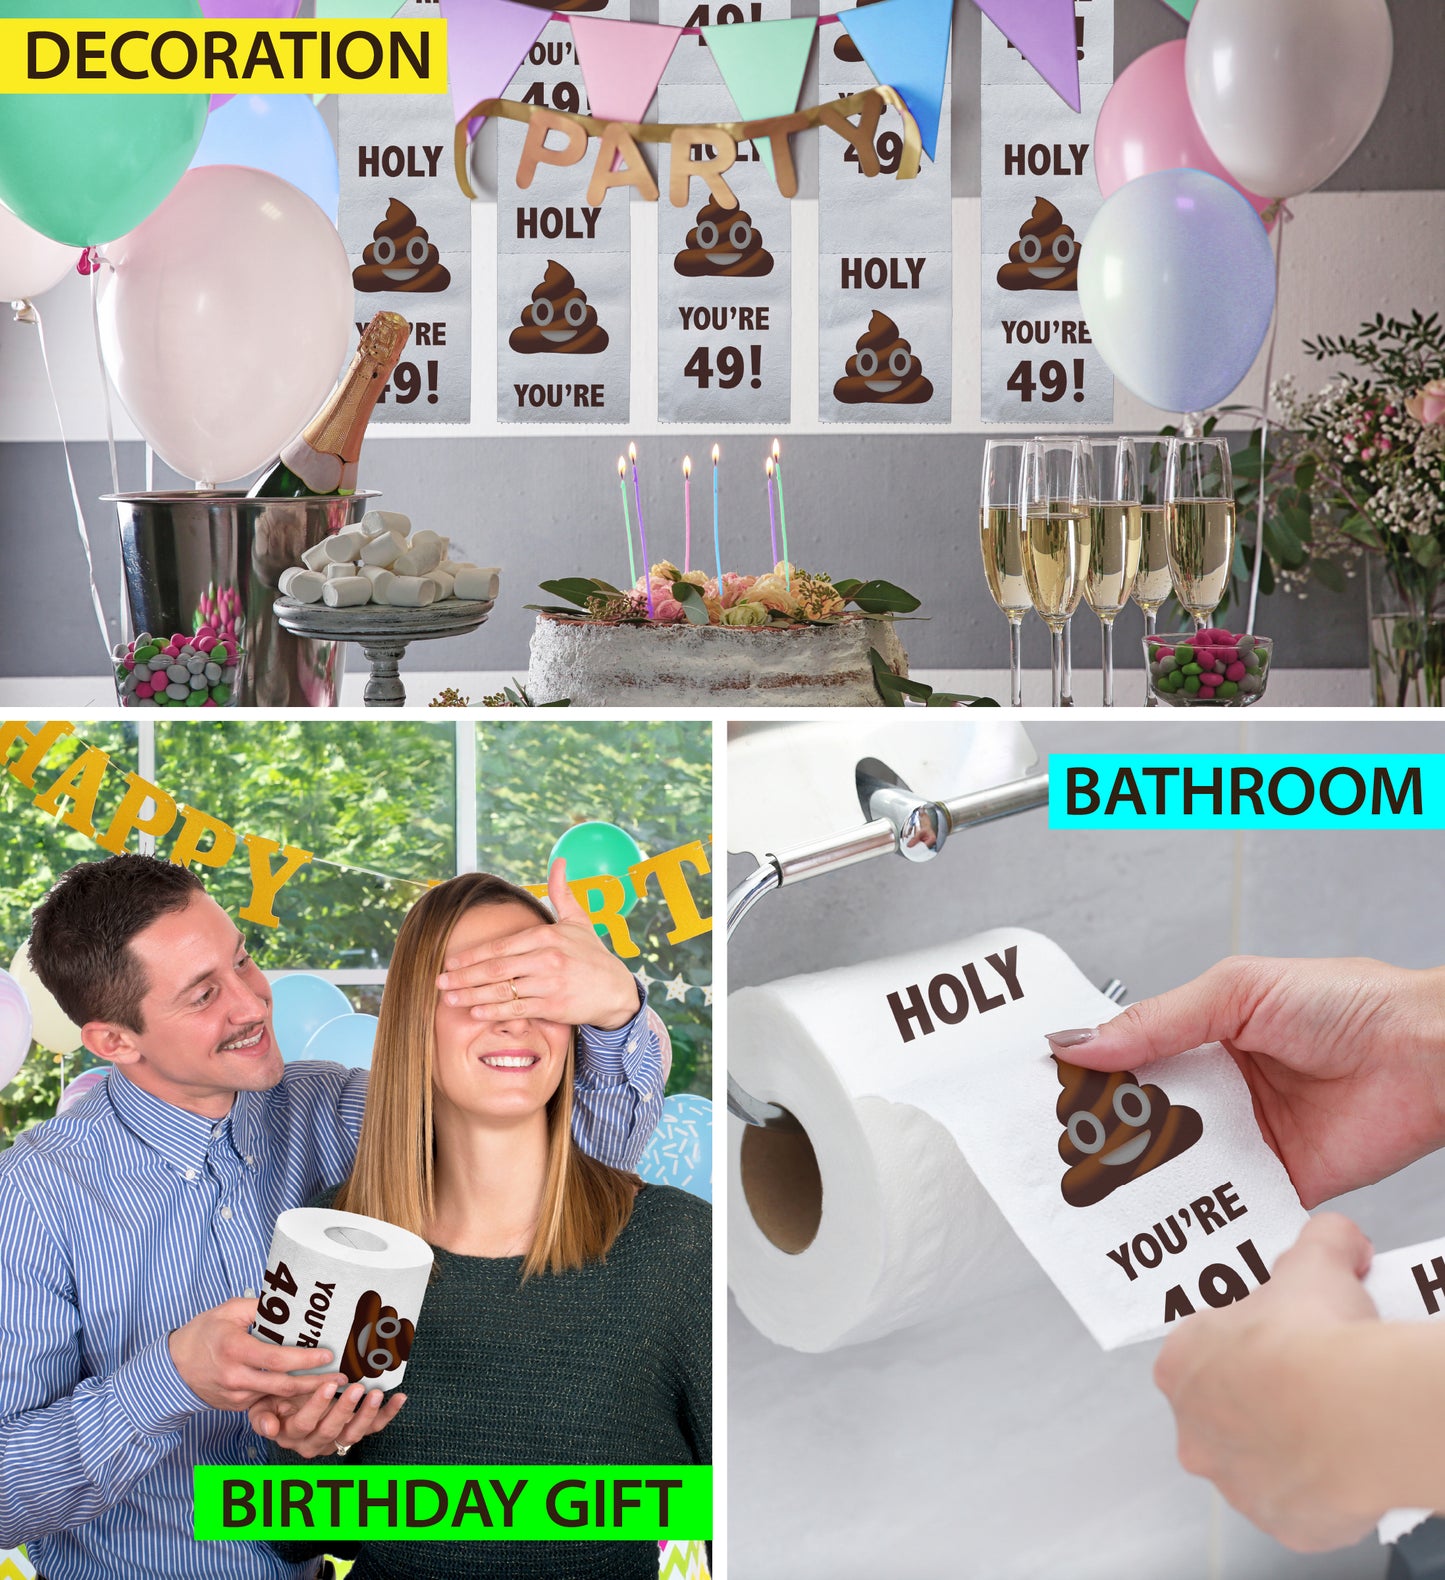 Printed TP Holy Poop You're 49 Funny Toilet Paper Roll Birthday Party Gag Gift